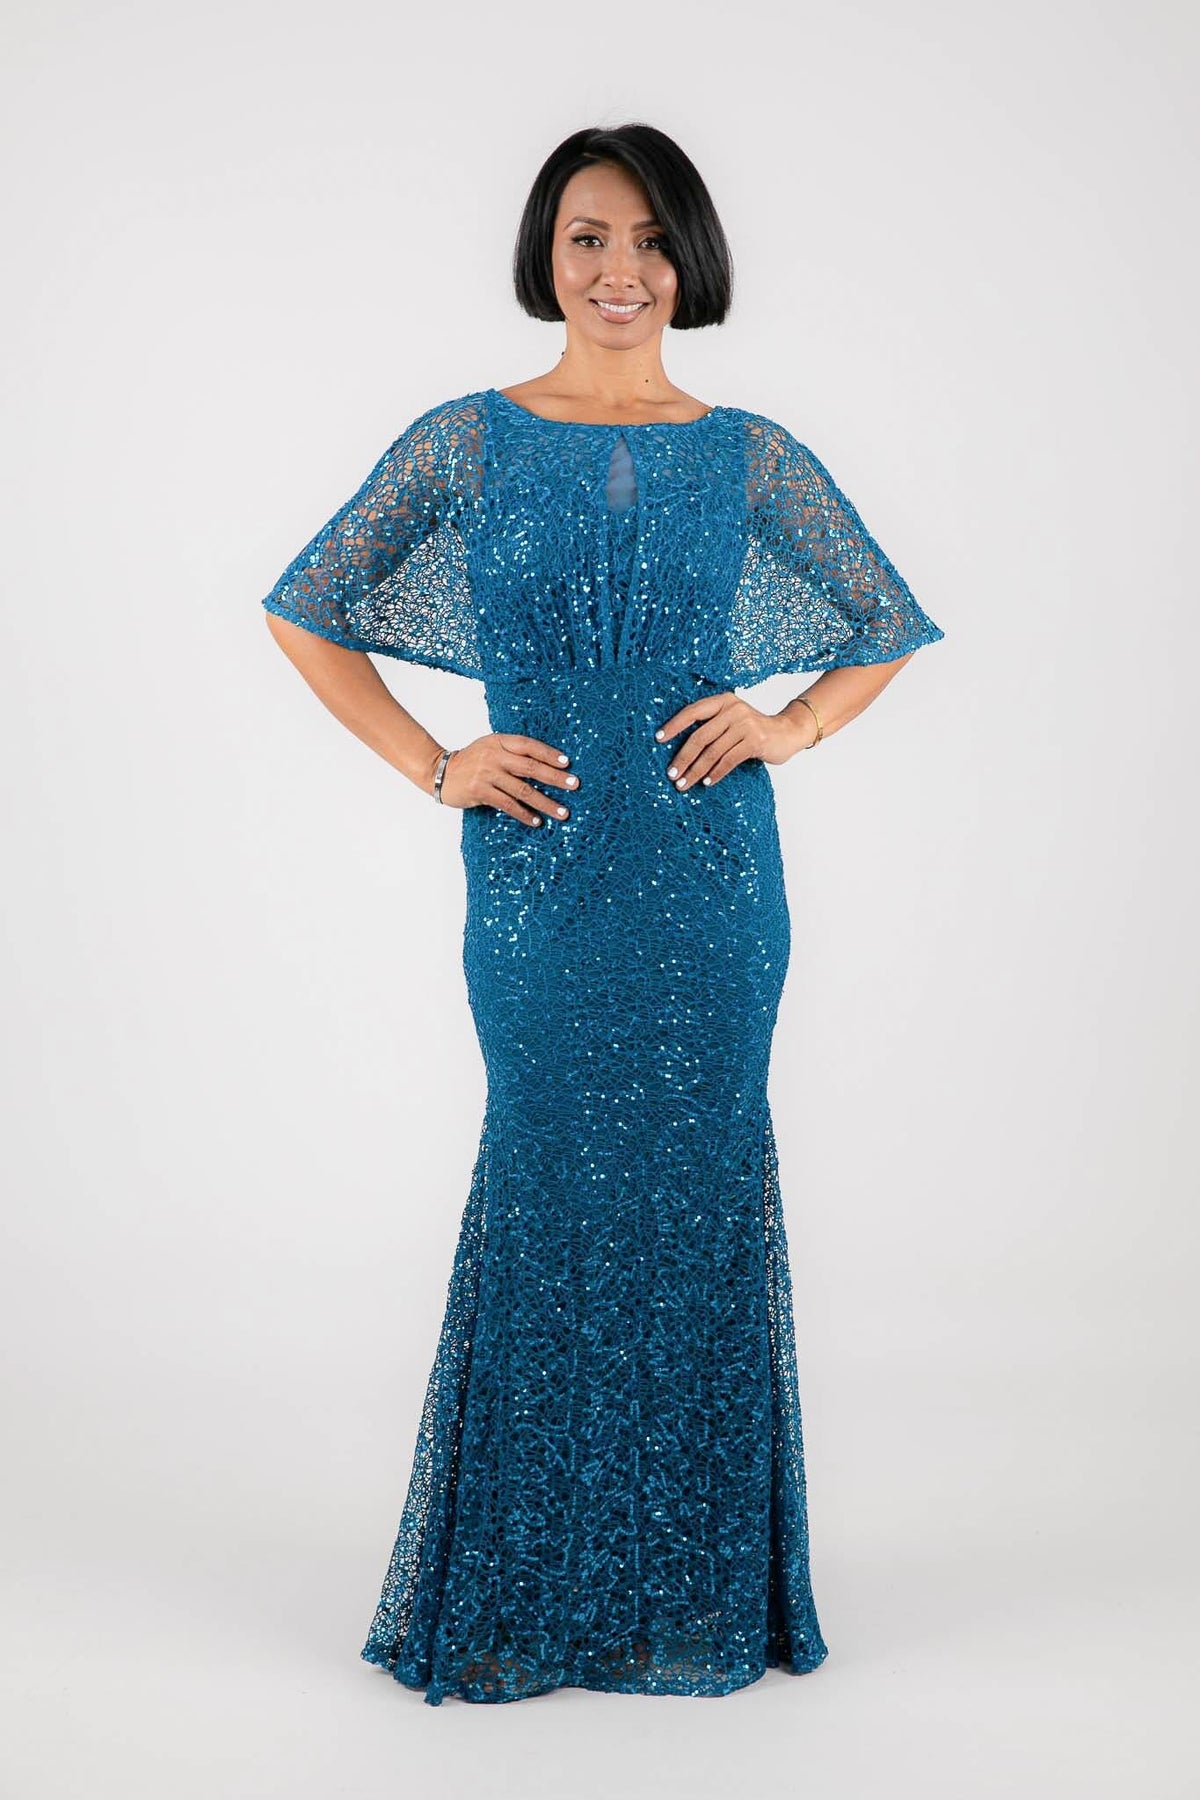 Teal blue green sequin evening maxi dress with boat neckline and butterfly sheer half sleeves